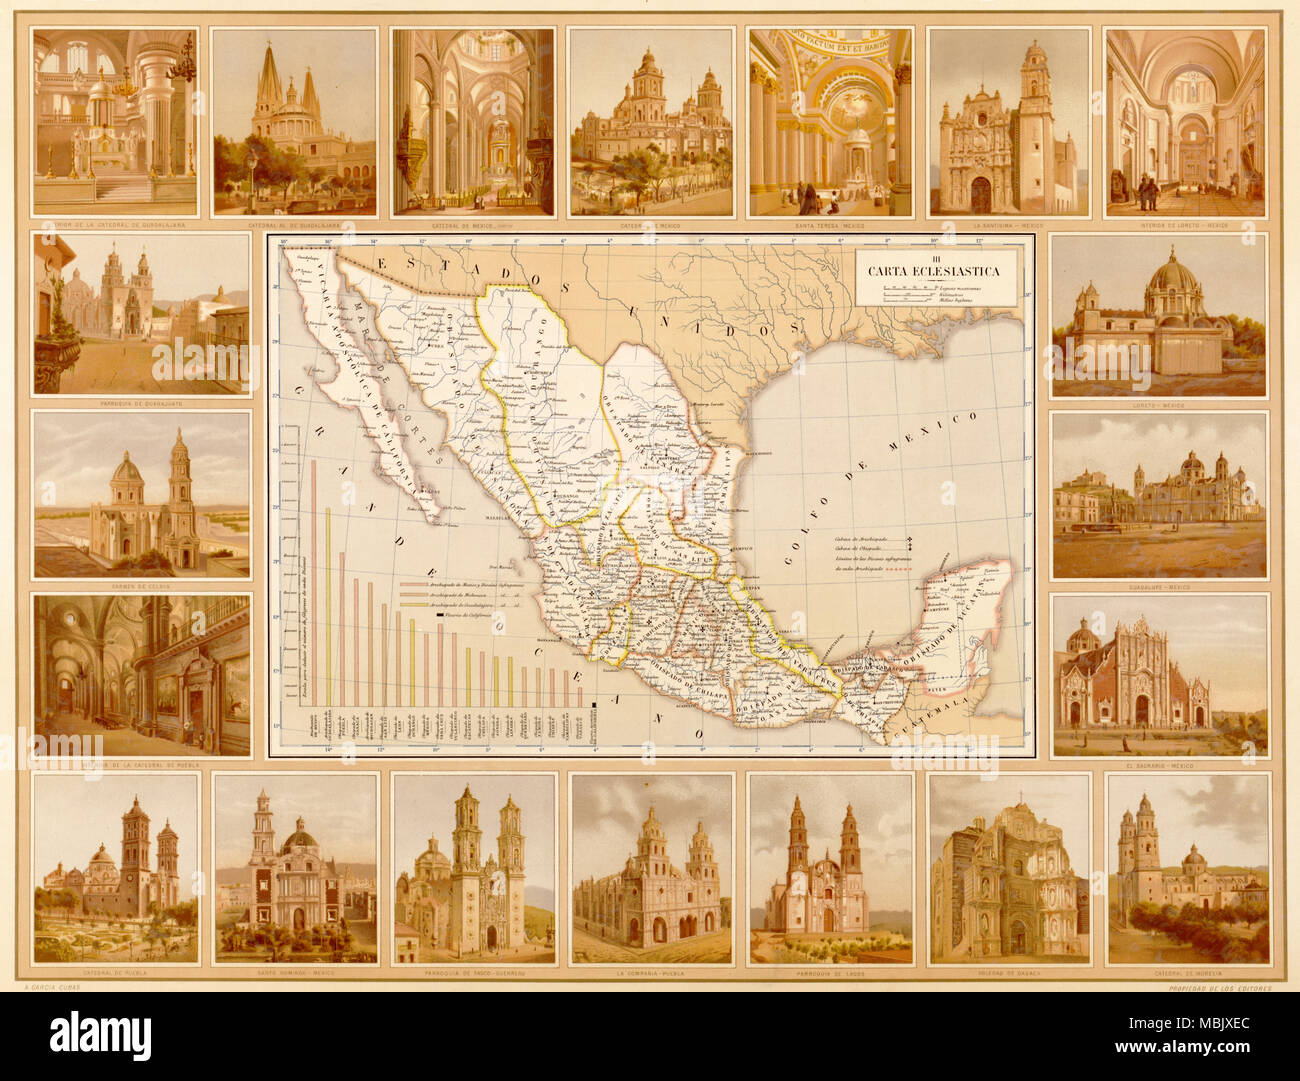 Ecclesiatical Map of Mexico - 1885 Stock Photo